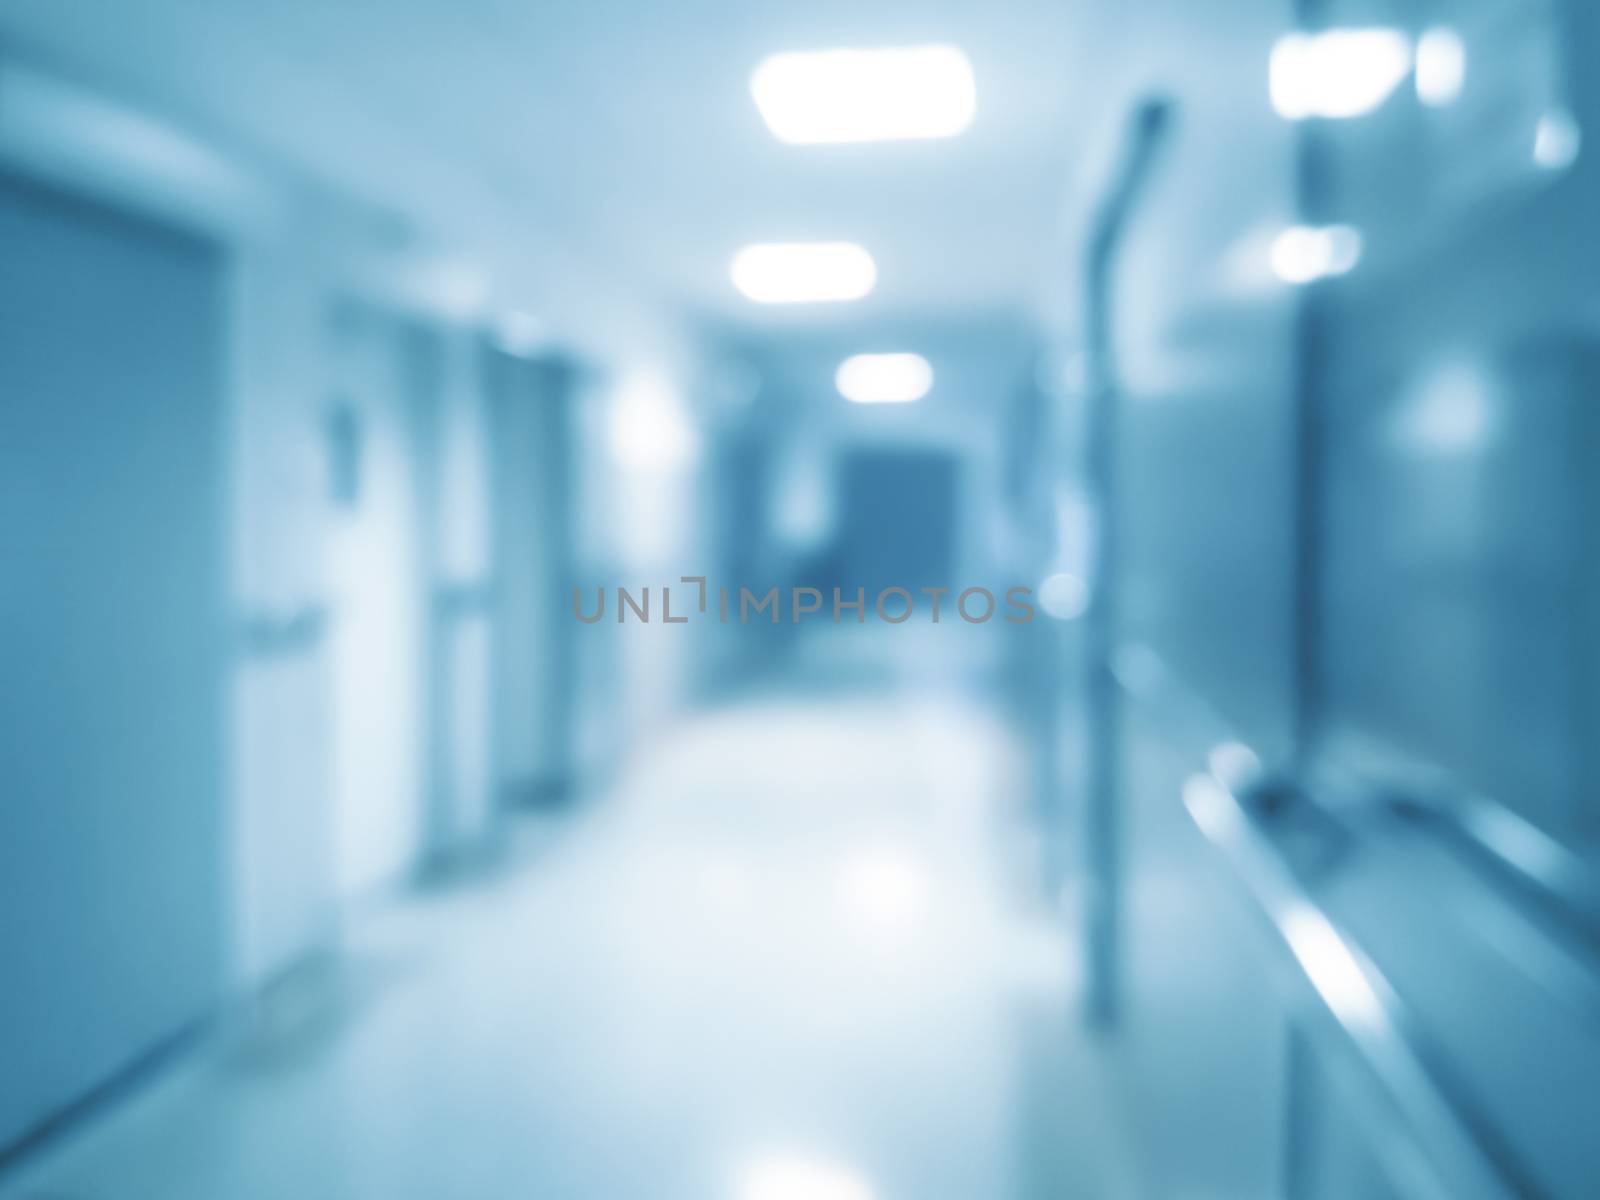 Blurred abstract hospital background - corridor with rooms for patients and bokeh lights (blue filter effect).